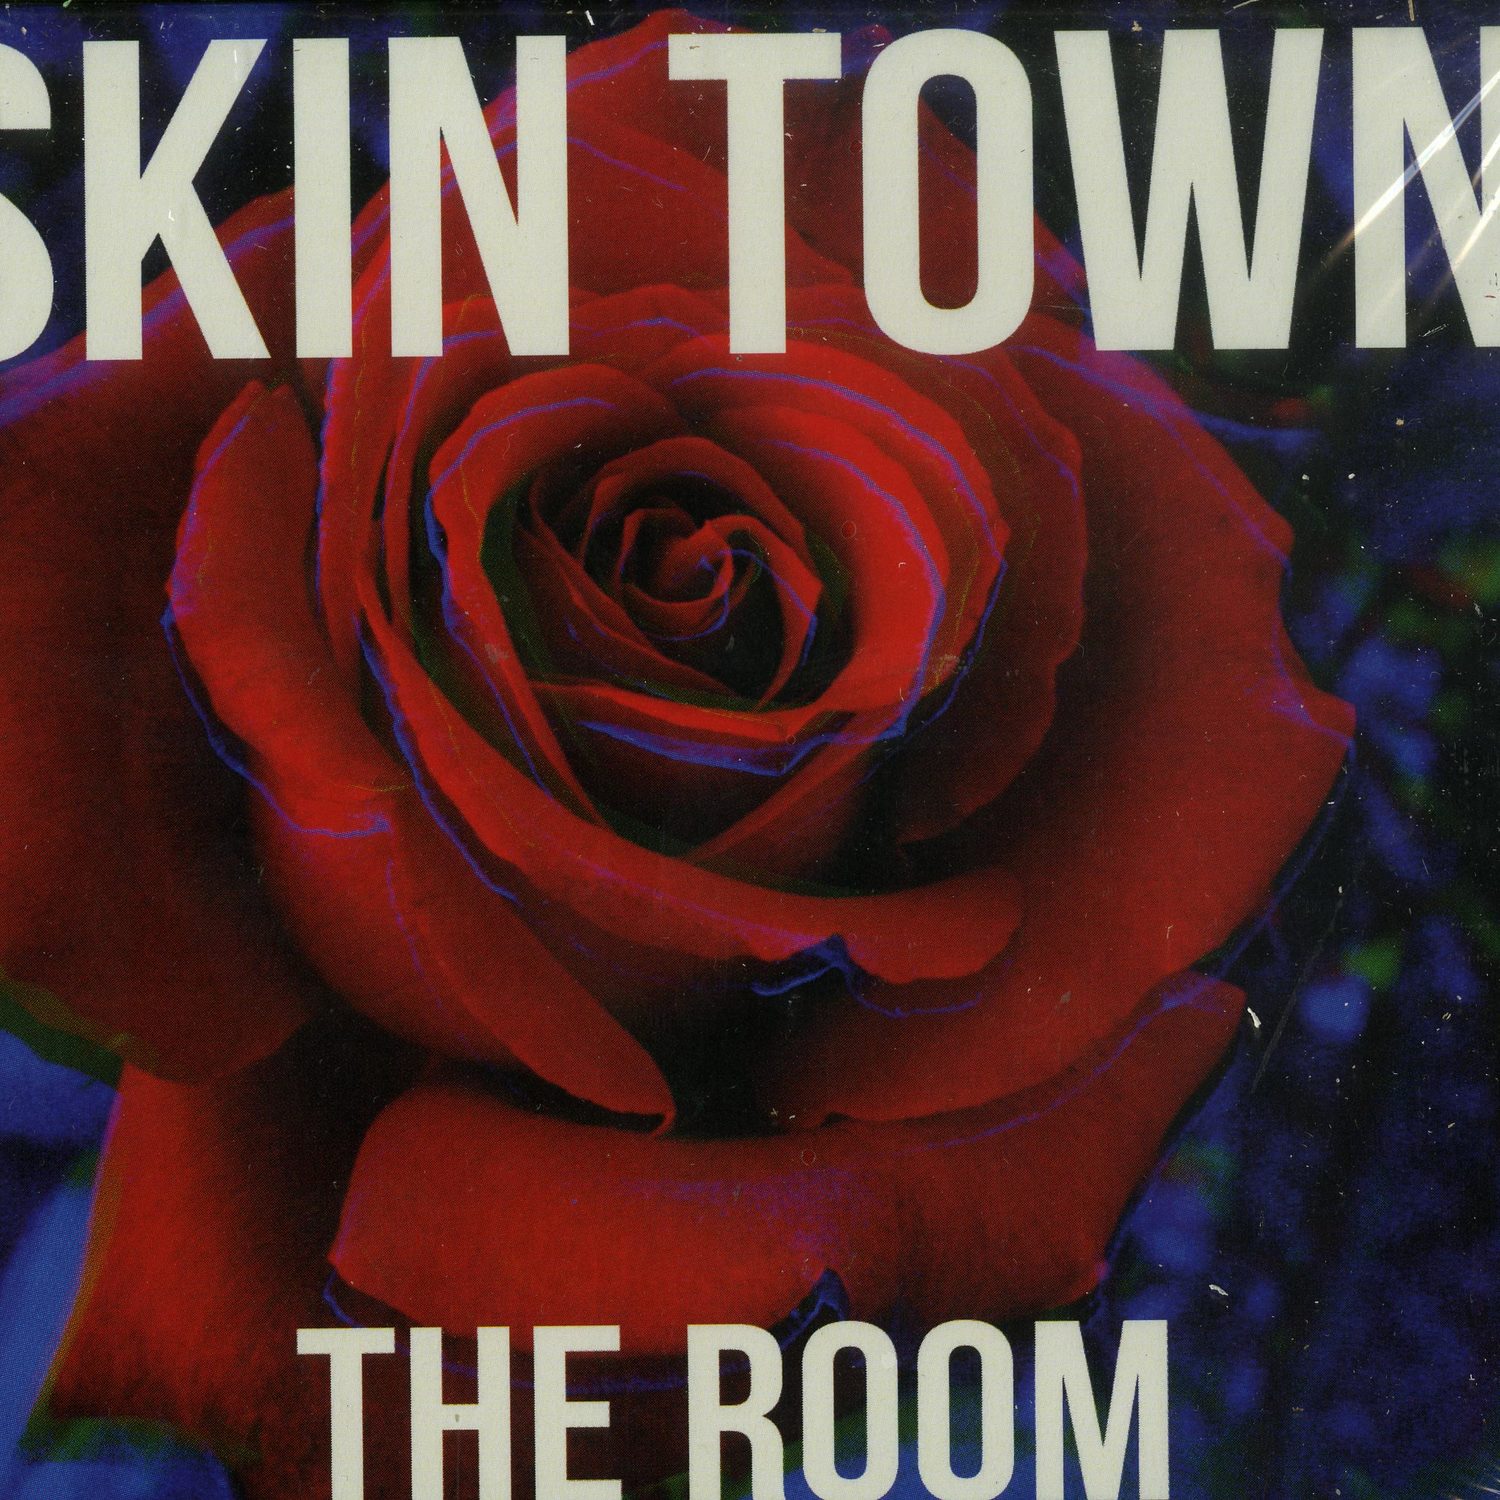 Skin Town - THE ROOM 